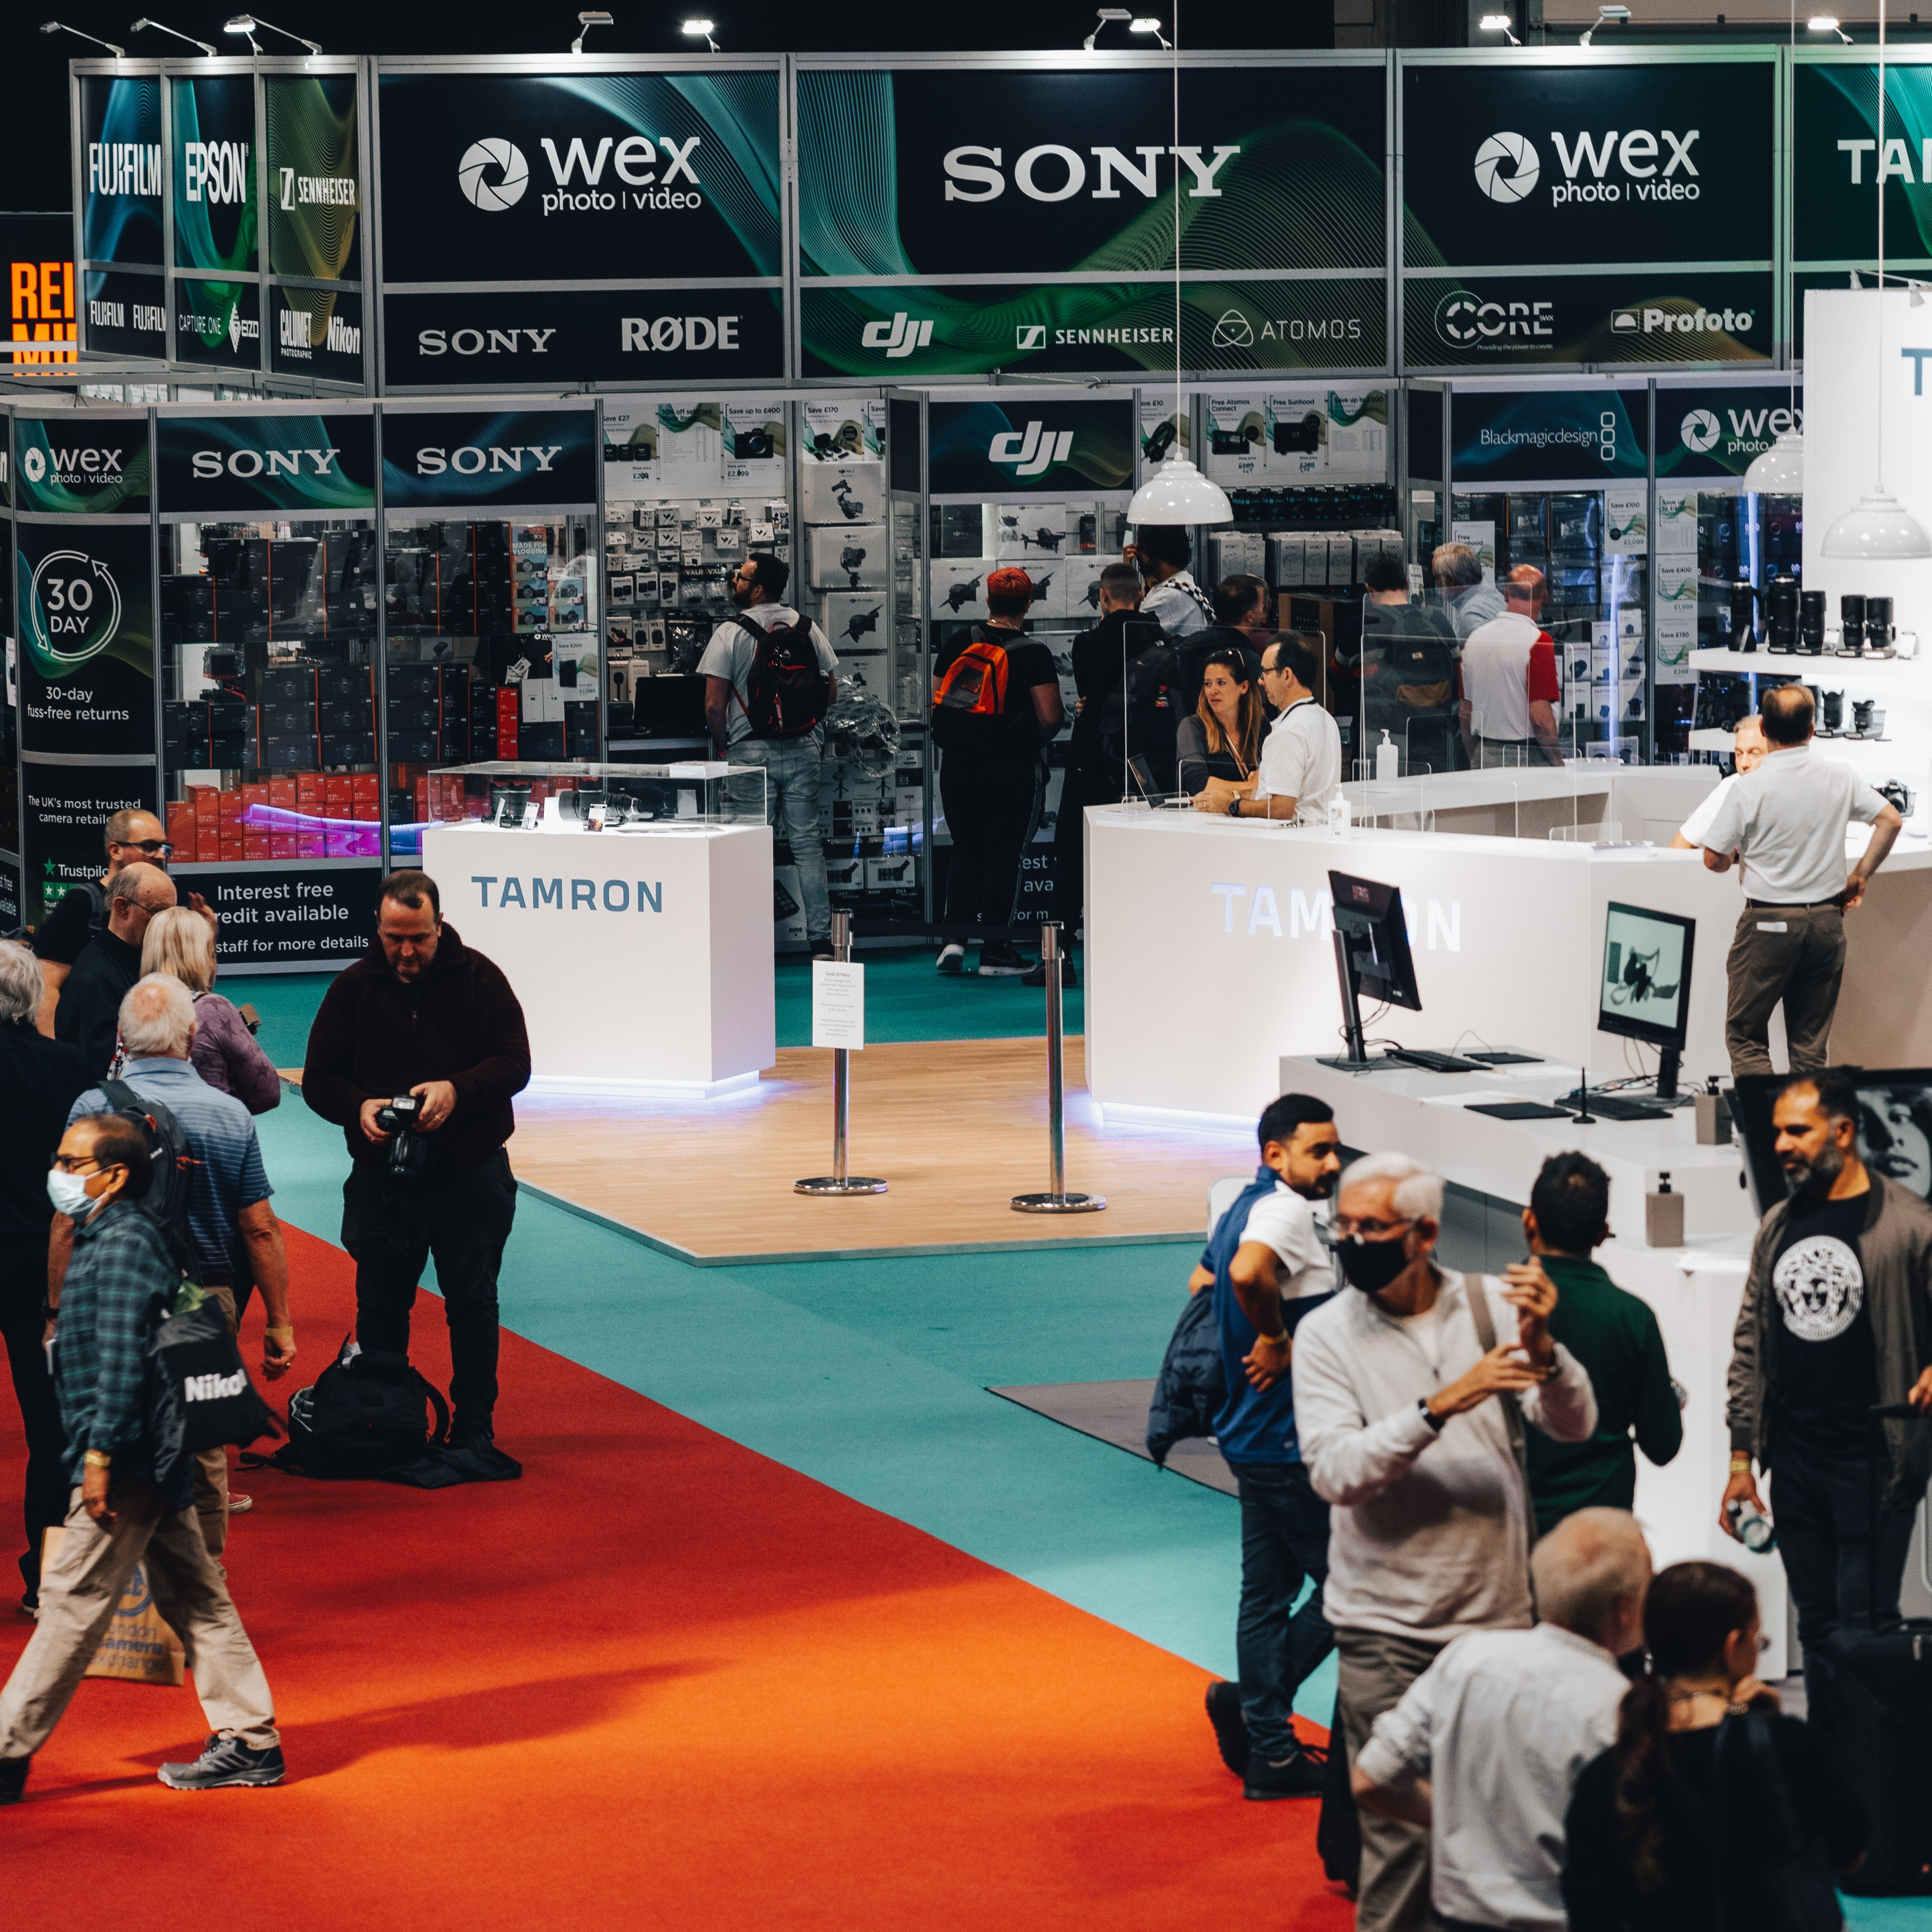 Custom Trade Show Displays: Building Brands and Engaging Audiences